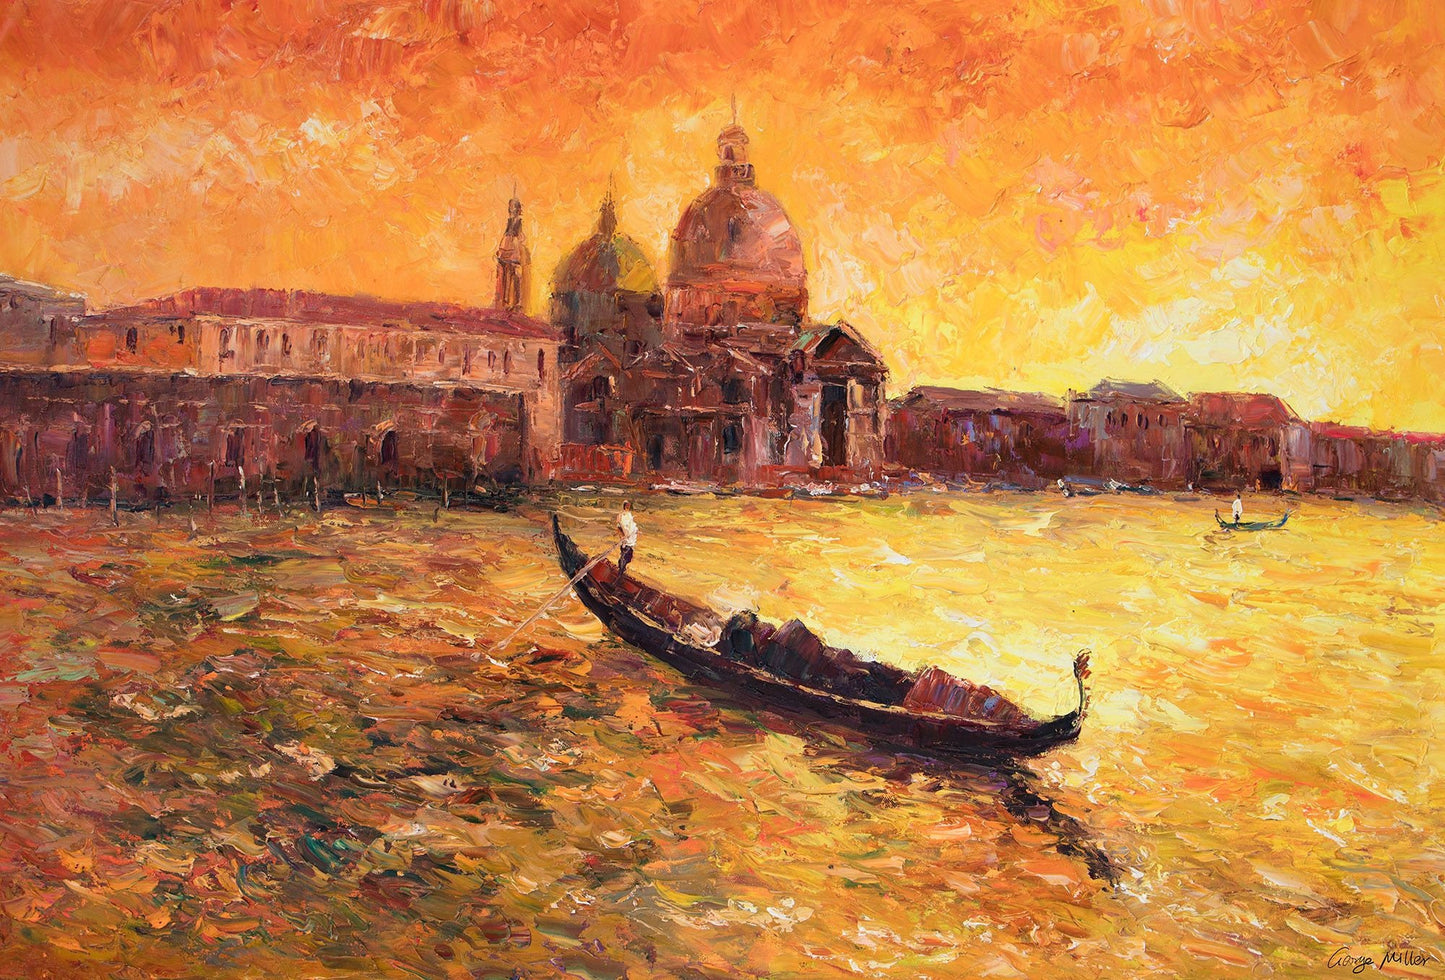 Landscape Oil Painting Venice Grand Canal Gondora, Large Art, Painting Abstract, Wall Art, Abstract Wall Art, Large Contemporary Painting